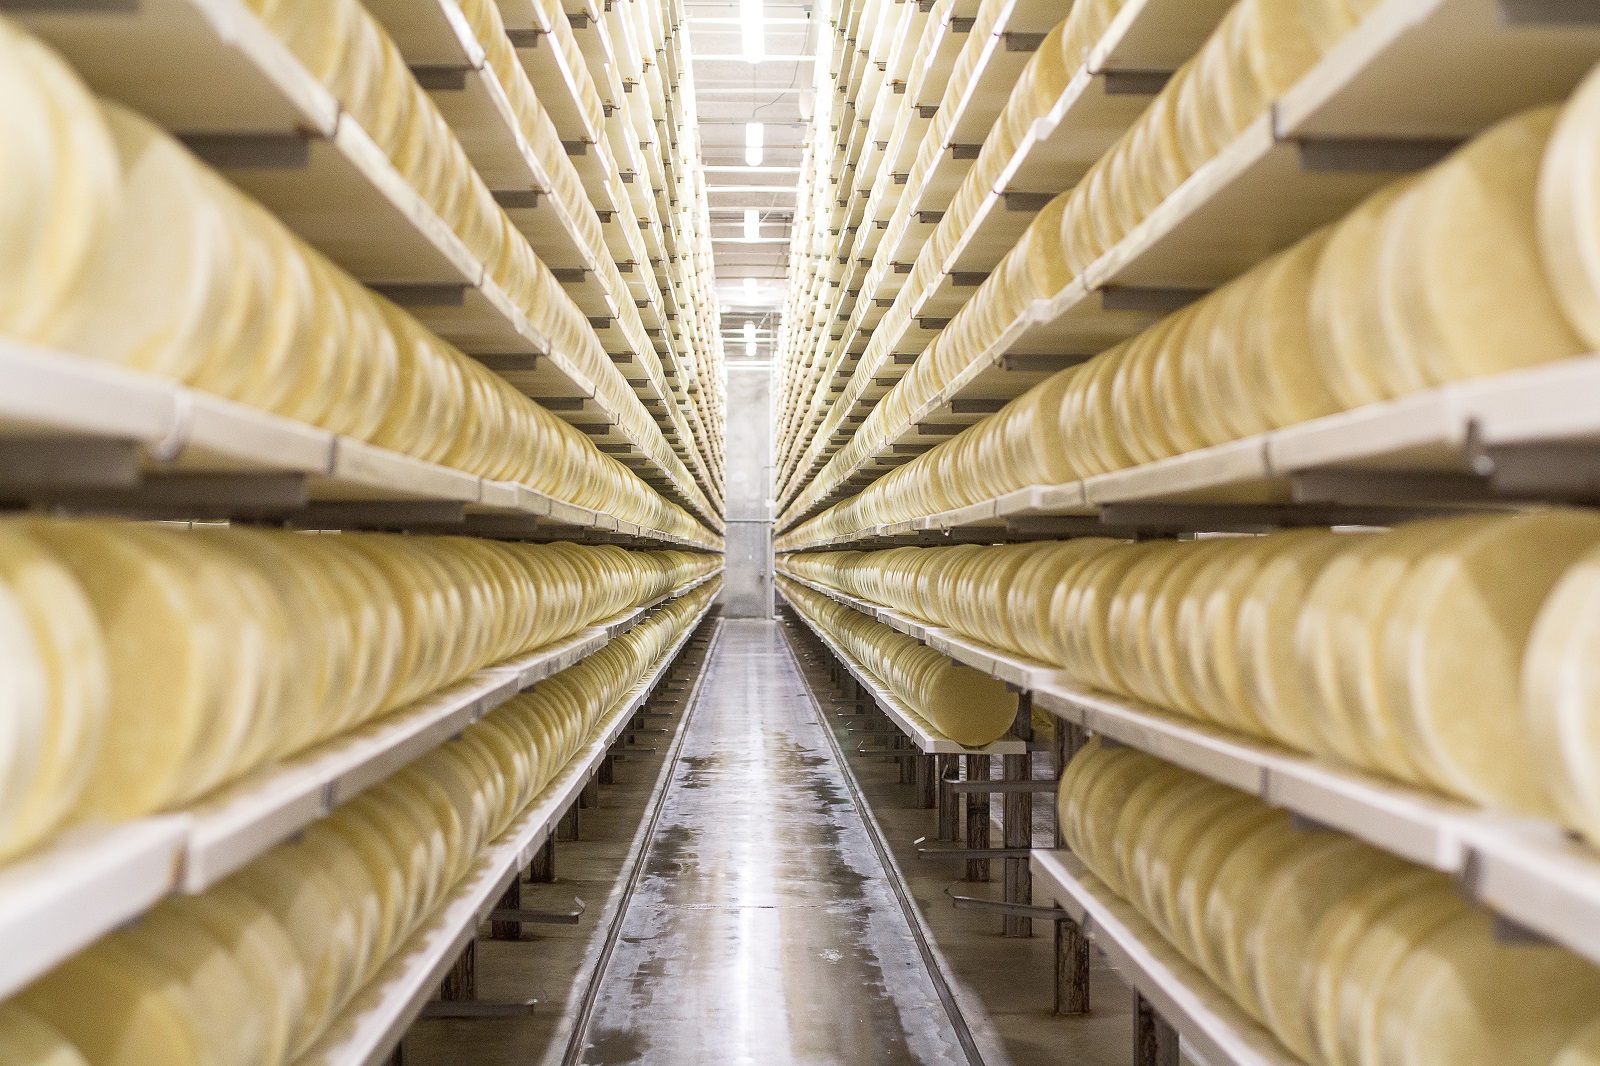 Thousands of wheels of hard Italain cheese (Parmesan, Asiago, Romano) in the Schuman Cheese Cello aging room in Wisconsin